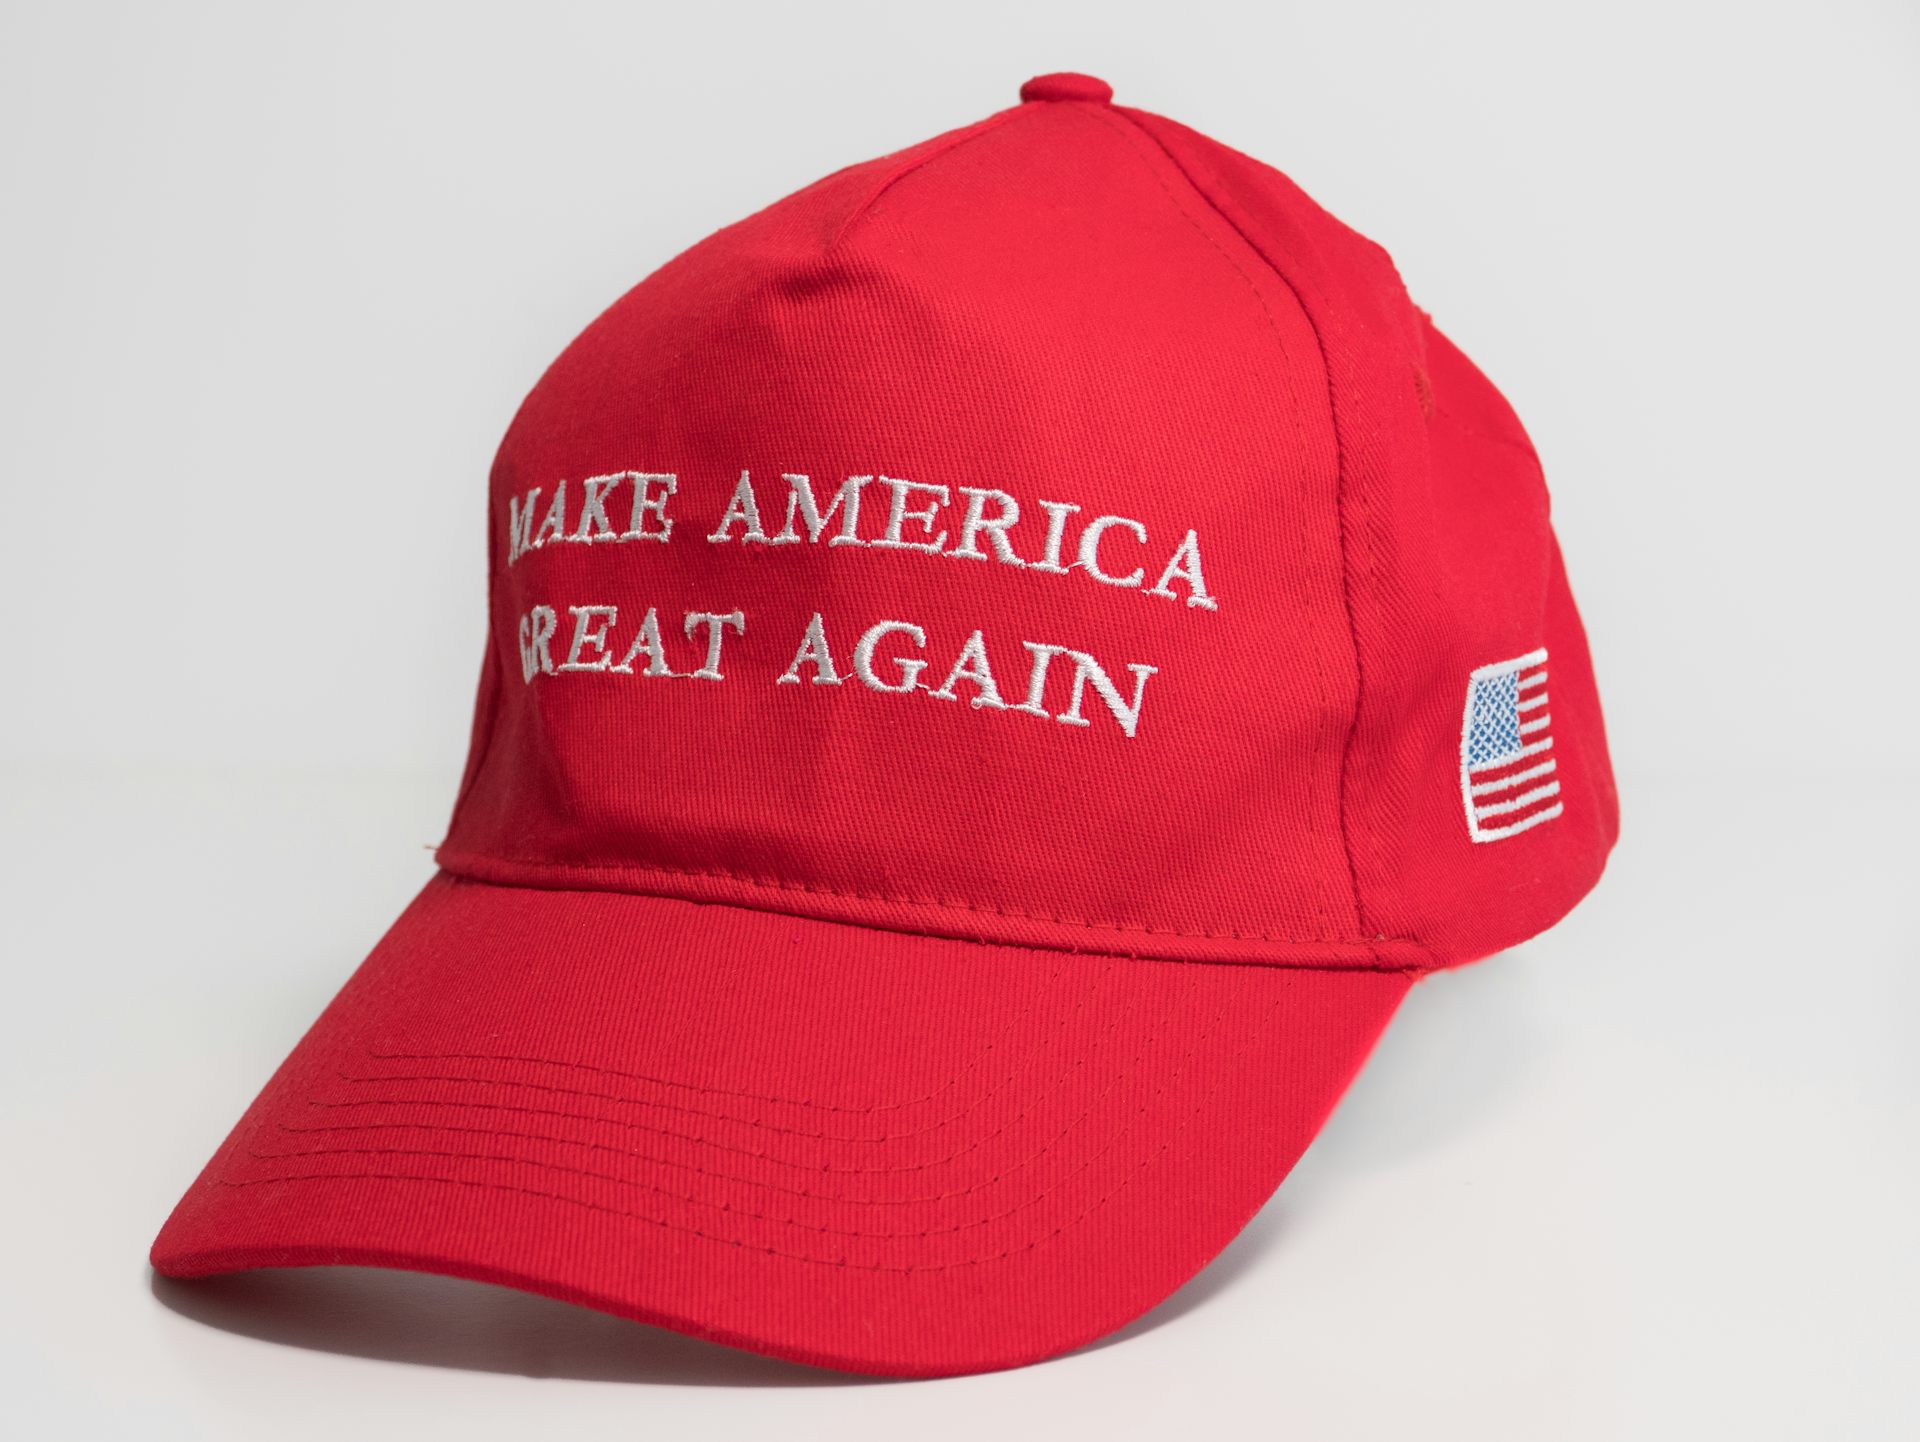 Trump Supporters Trump MAGA Hat Make America Great Again Donald Trump Pro Trump Hat 2020 Election Hat Embroidered Hat Republican Hat